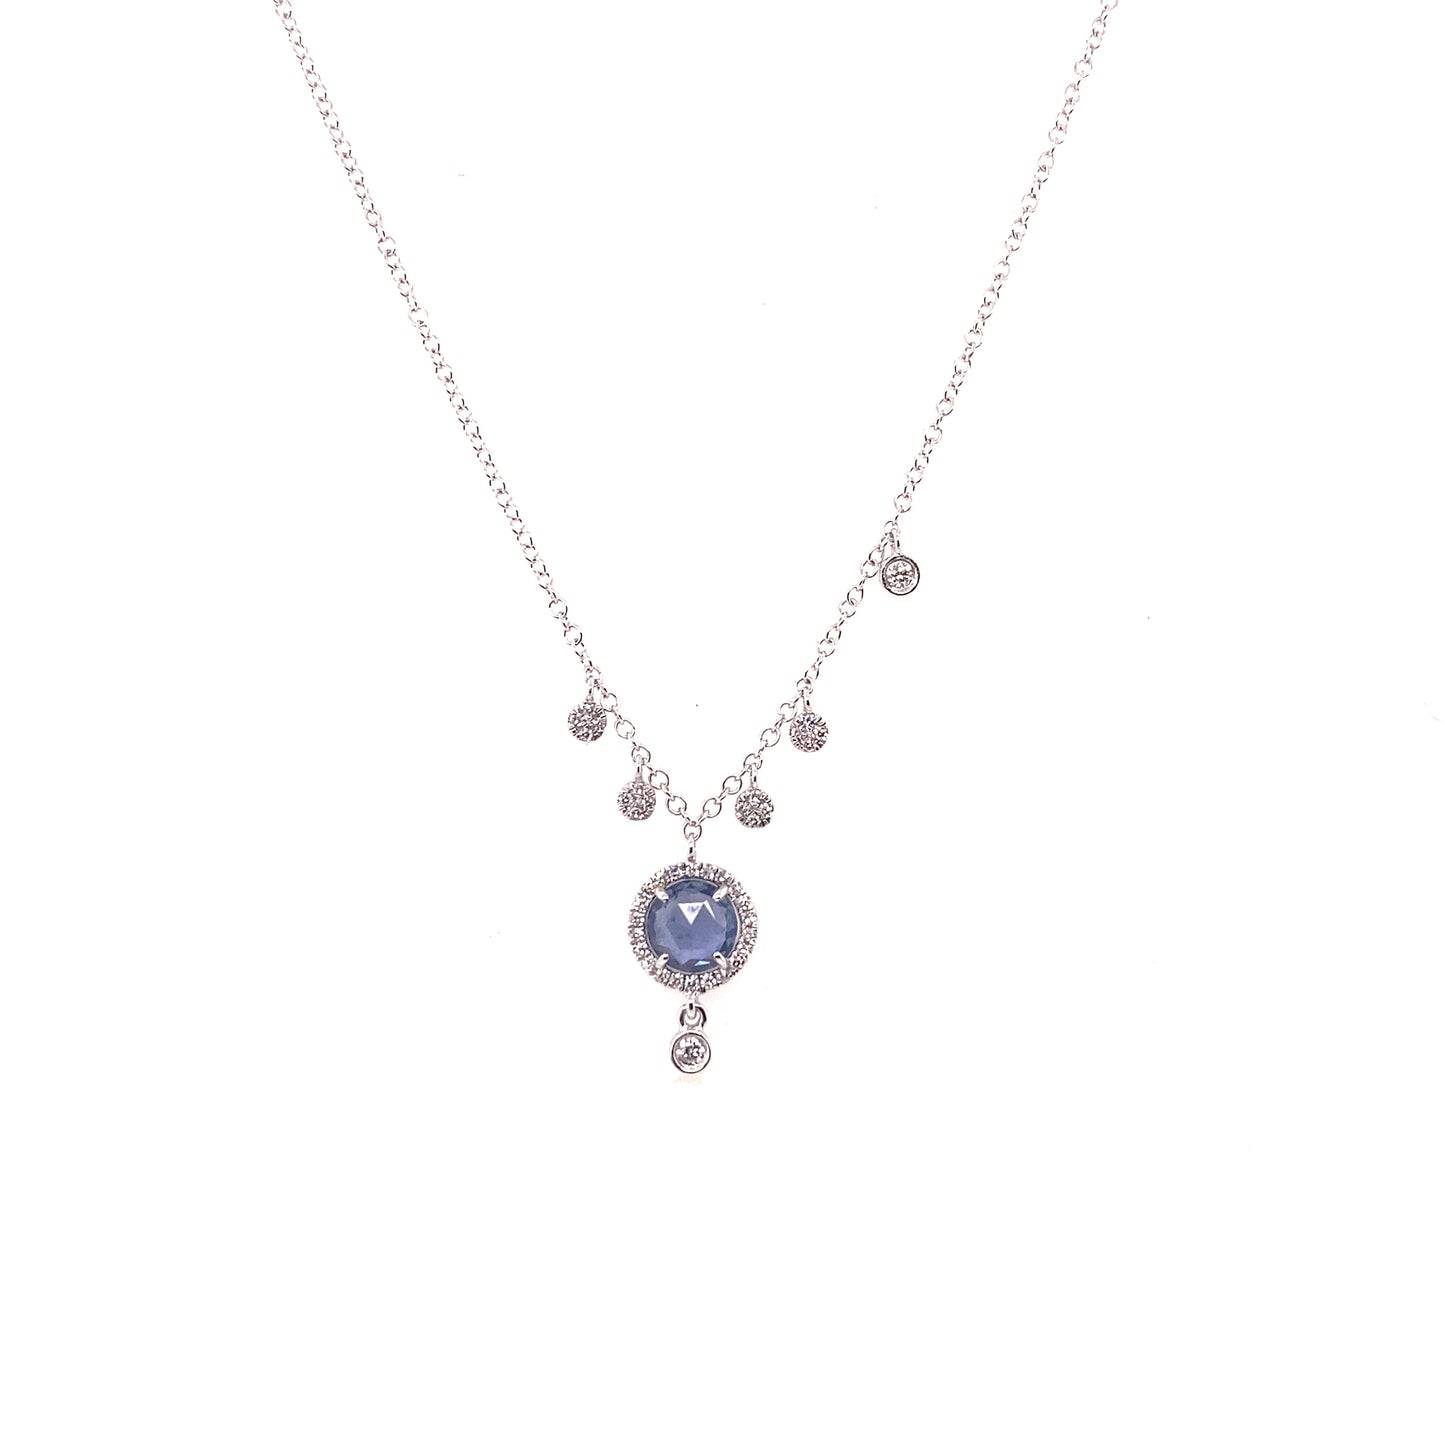 Meira T 14kt White Gold Sapphire and Diamond Charm Necklace